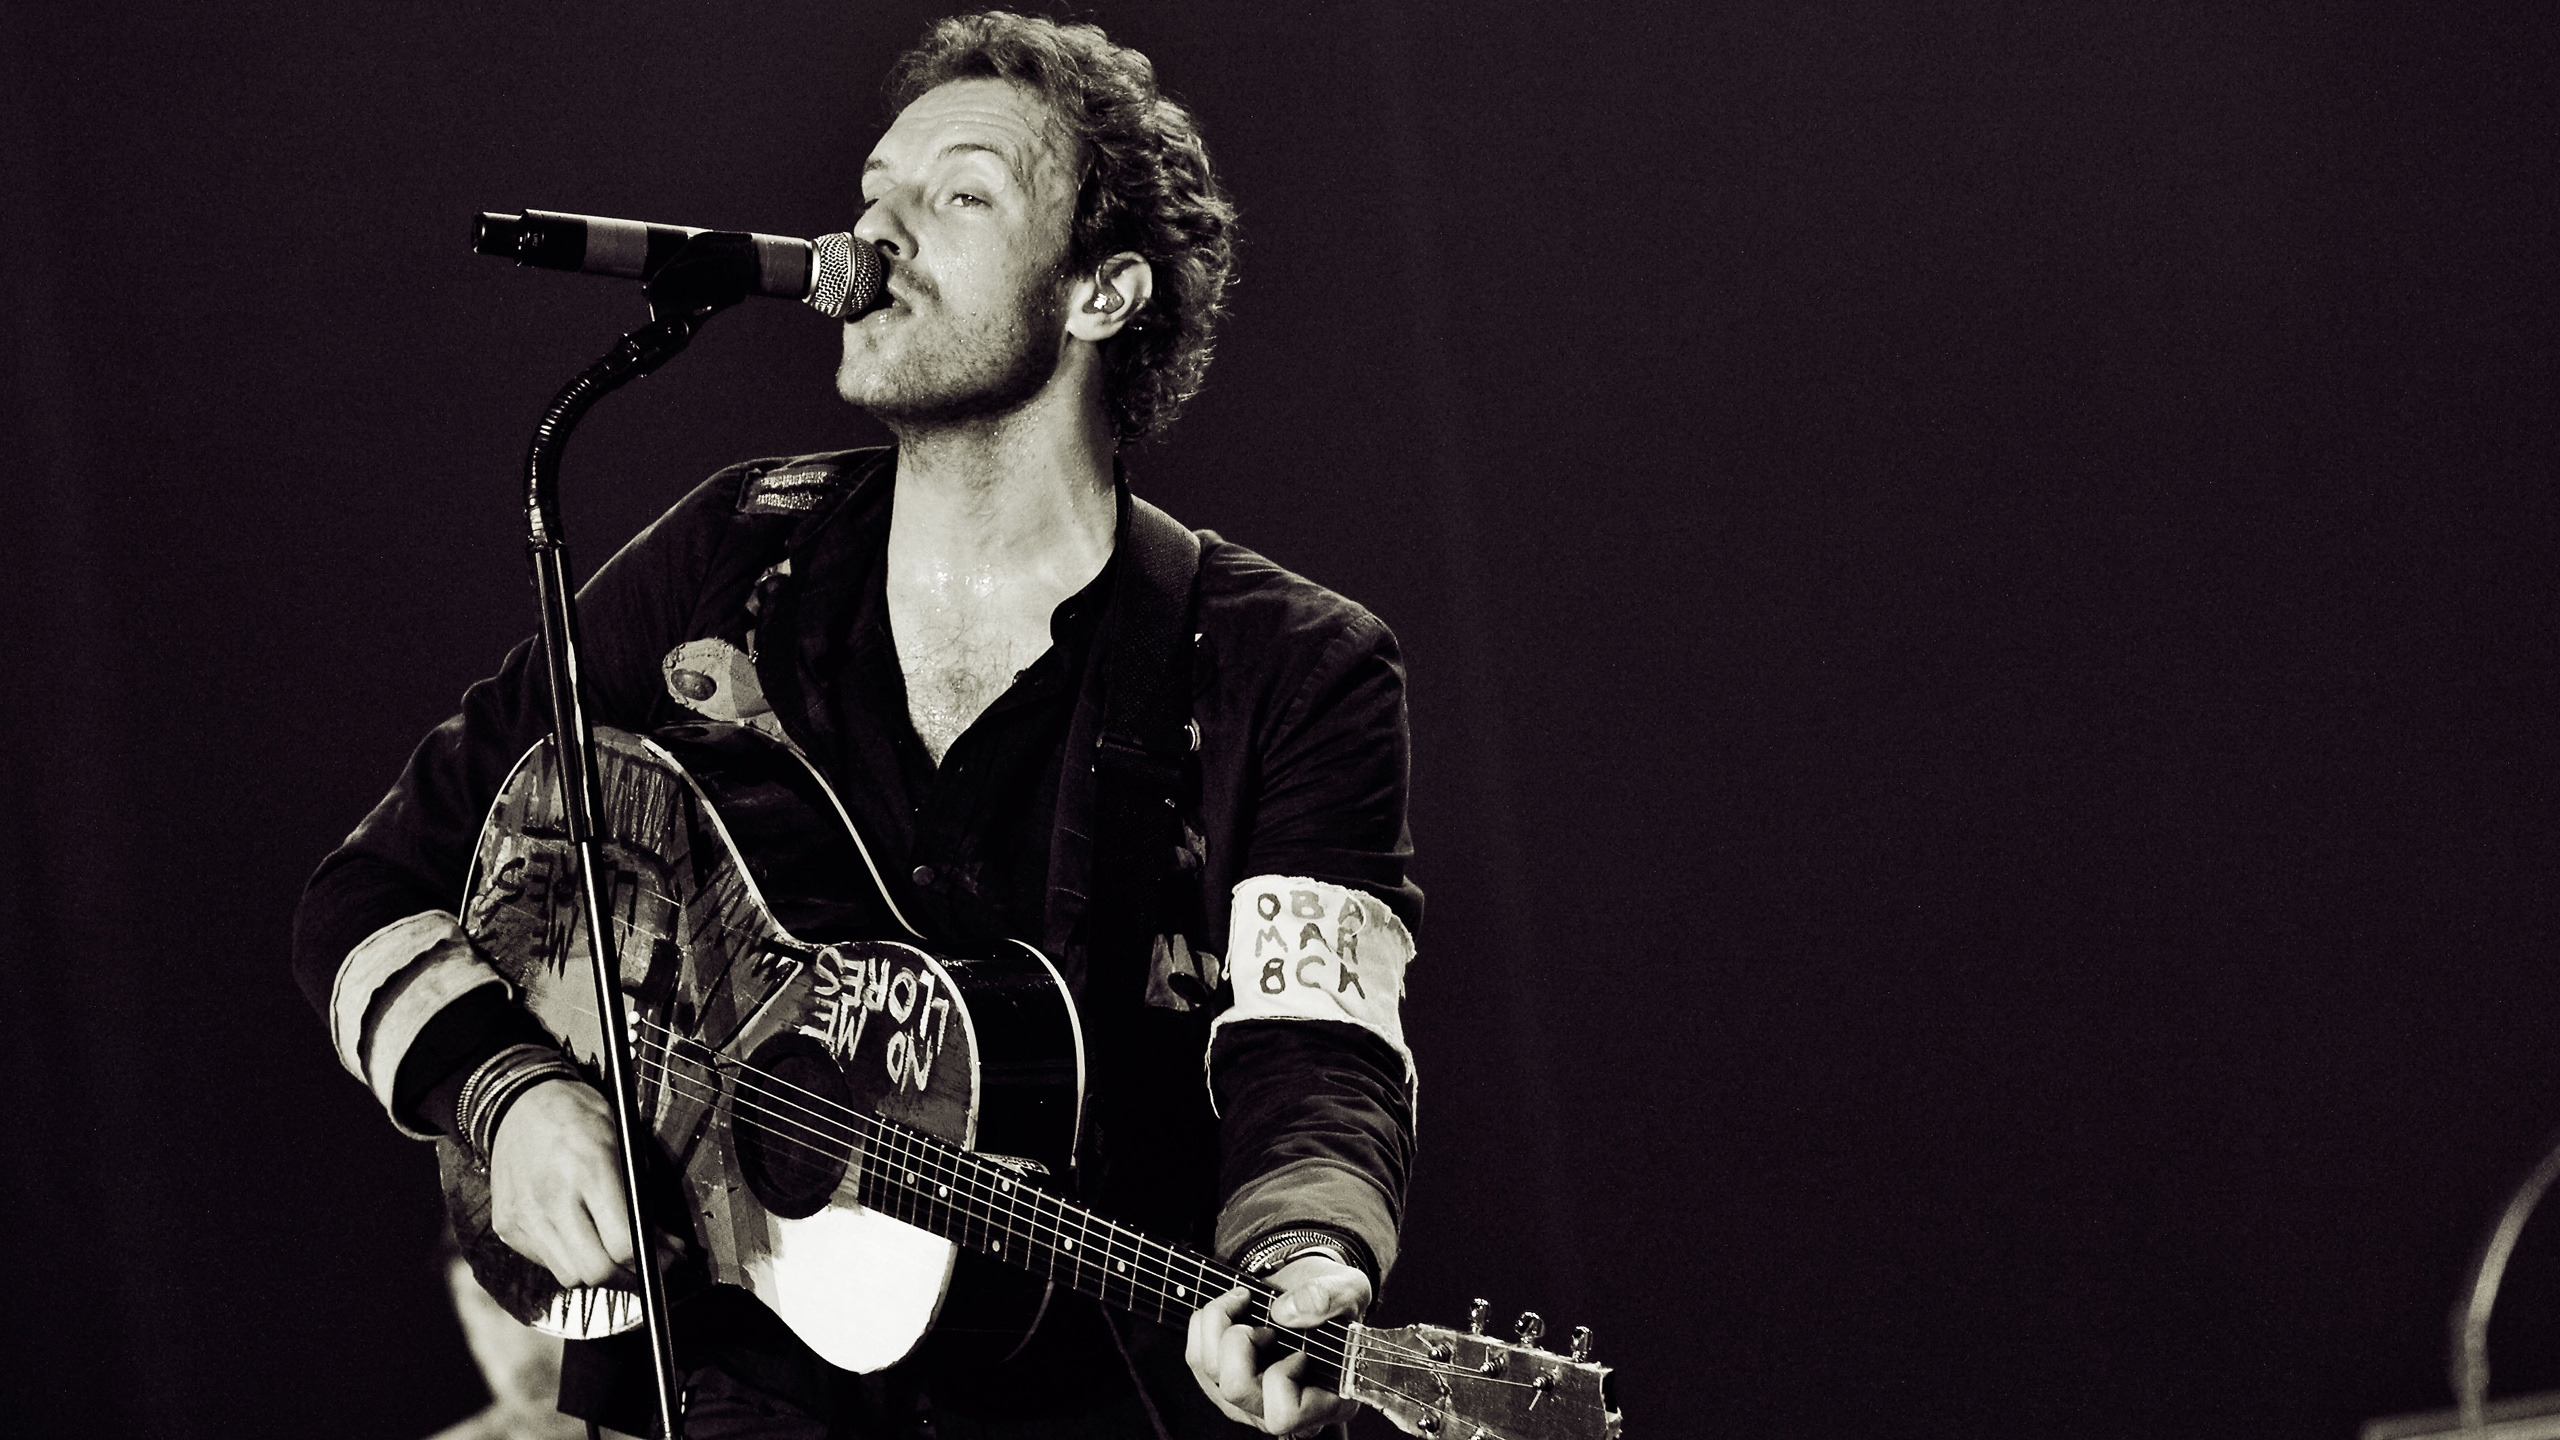 Chris Martin Coldplay for 2560x1440 HDTV resolution